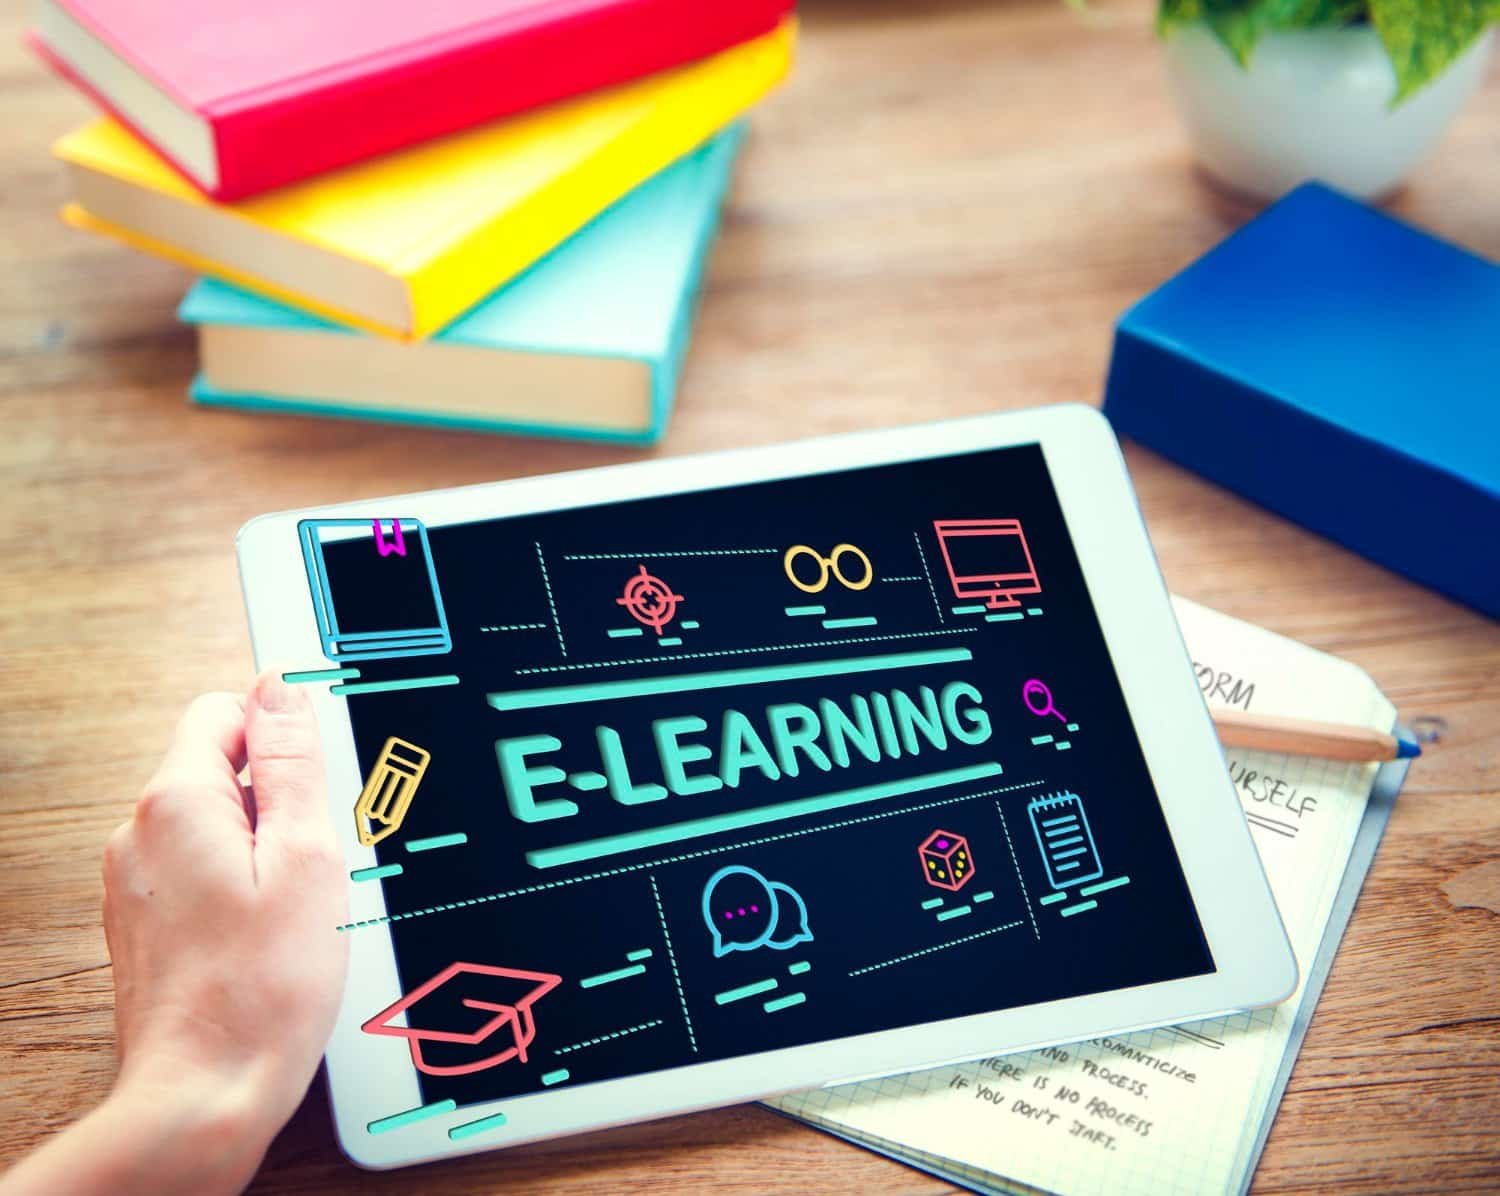 Online Learning Platforms: The Future of Education